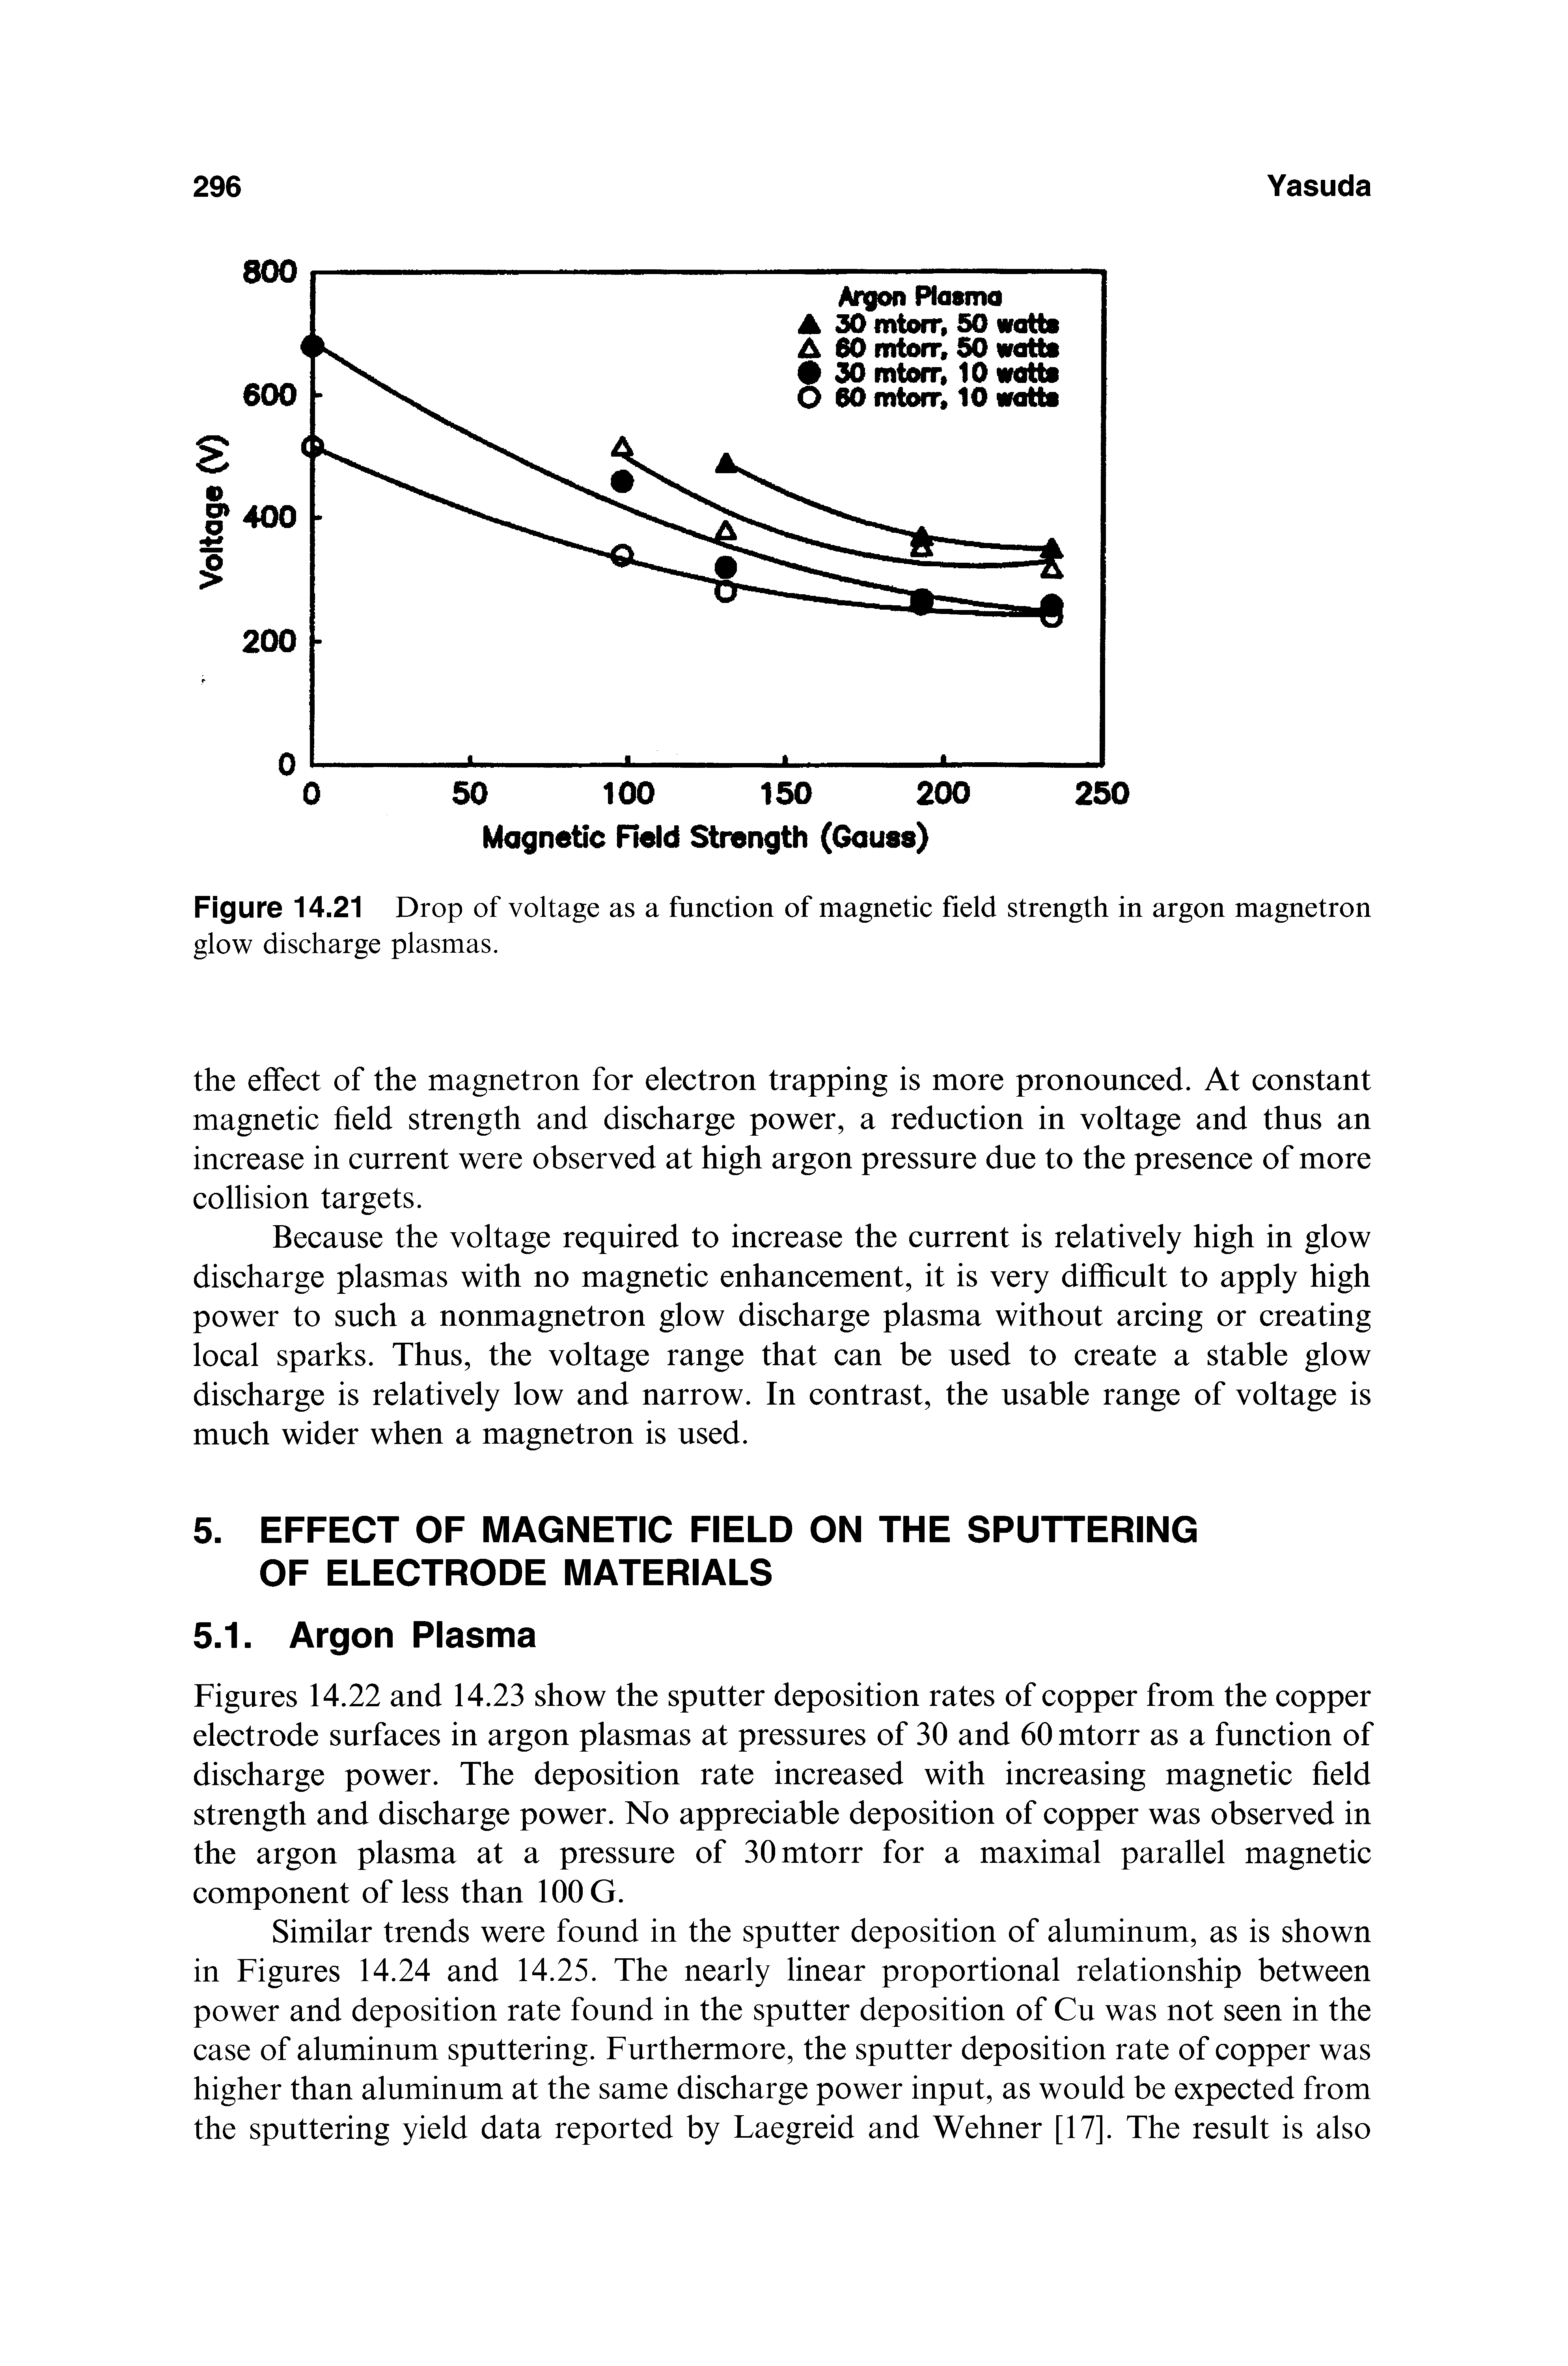 Figures 14.22 and 14.23 show the sputter deposition rates of copper from the copper electrode surfaces in argon plasmas at pressures of 30 and 60 mtorr as a function of discharge power. The deposition rate increased with increasing magnetic field strength and discharge power. No appreciable deposition of copper was observed in the argon plasma at a pressure of 30 mtorr for a maximal parallel magnetic component of less than 100 G.